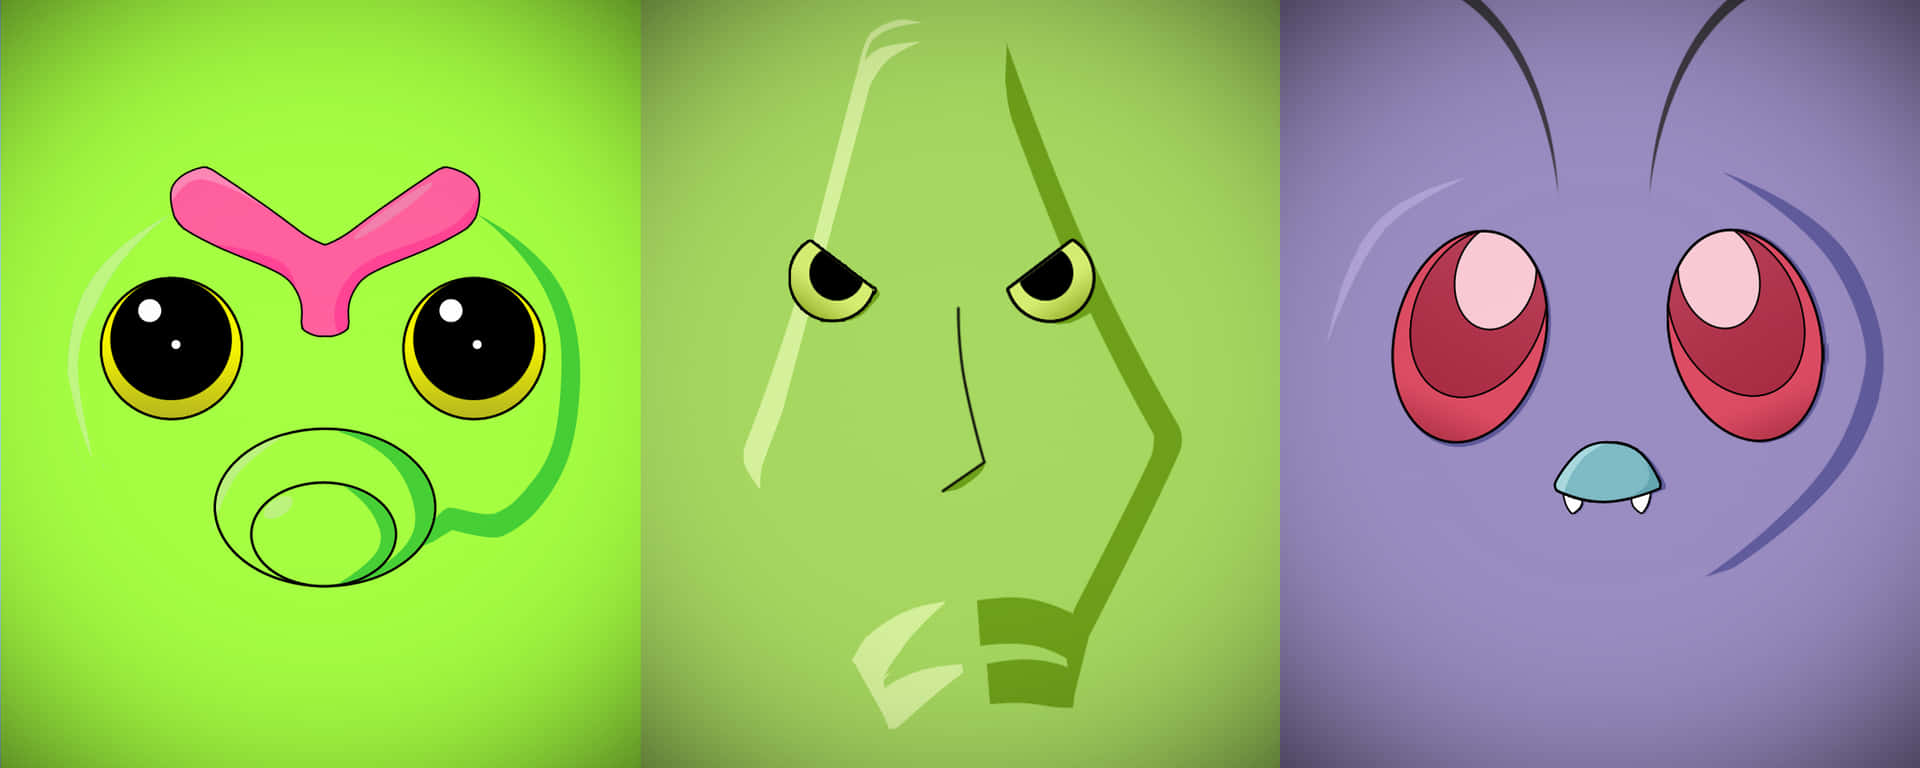 Caterpie, Metapod, And Butterfree Faces Desktop Wallpaper